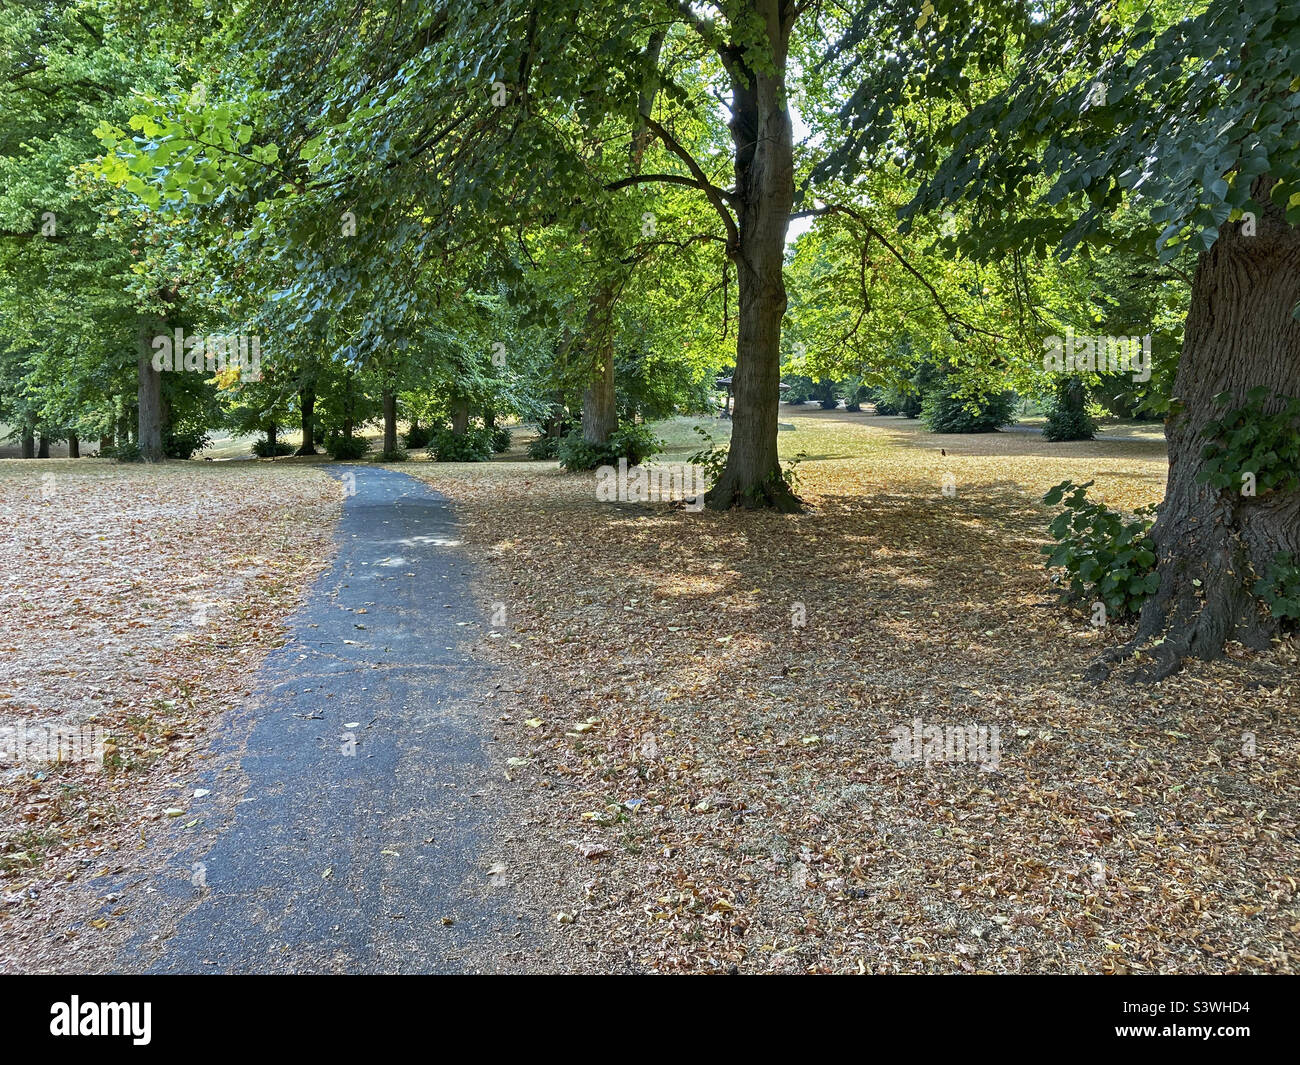 Dead leaves cover the ground in Ashcombe Park in Weston-super-Mare as an August heatwave brings drought-like conditions Stock Photo